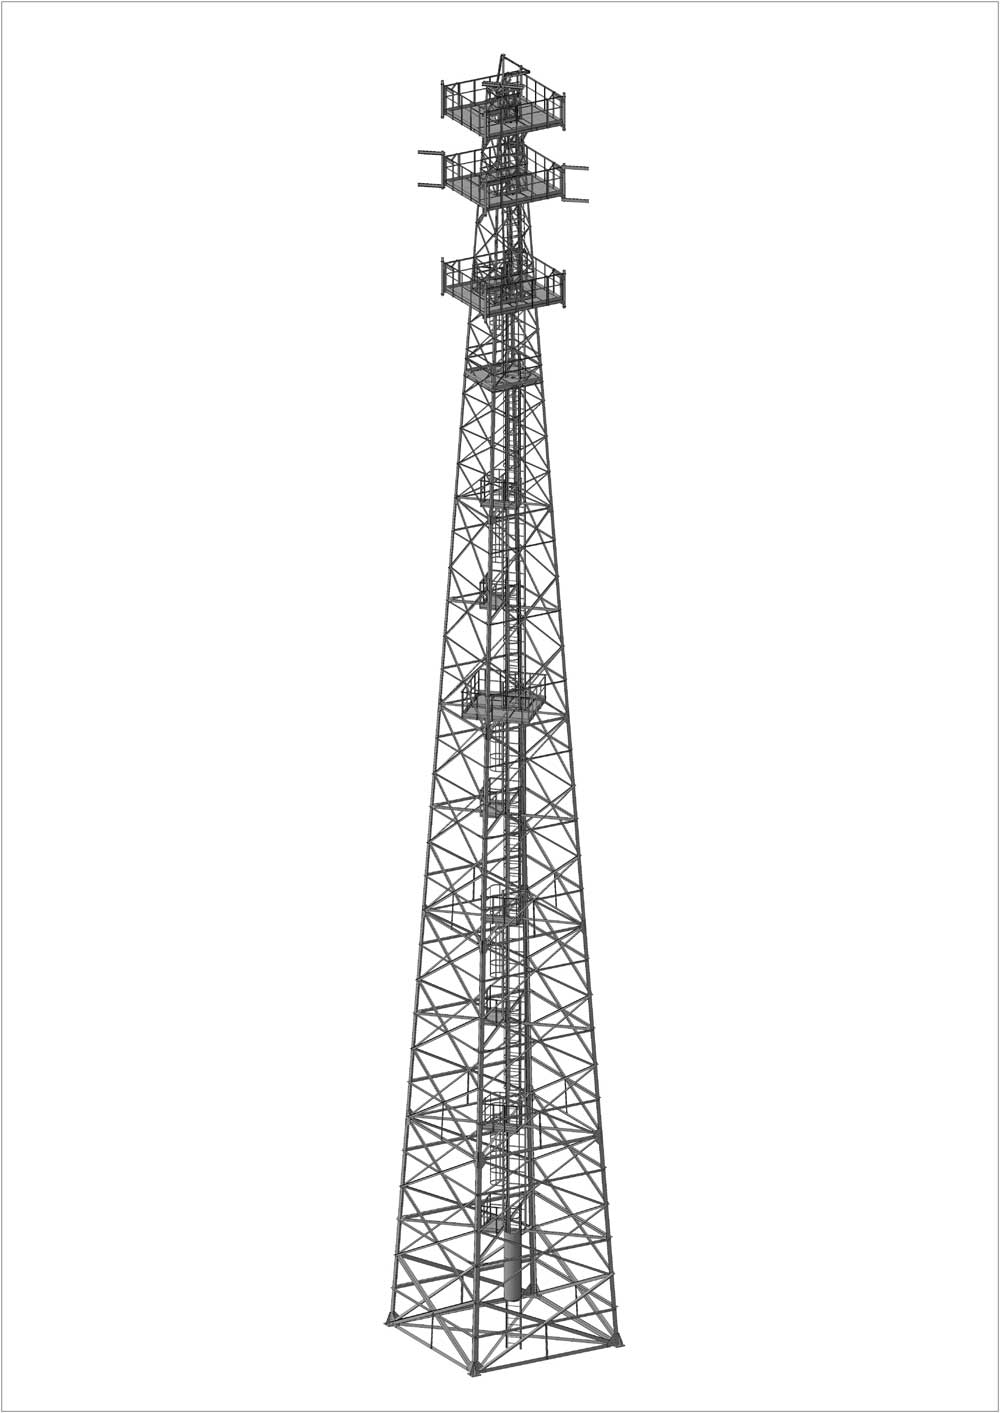 tower-1 image